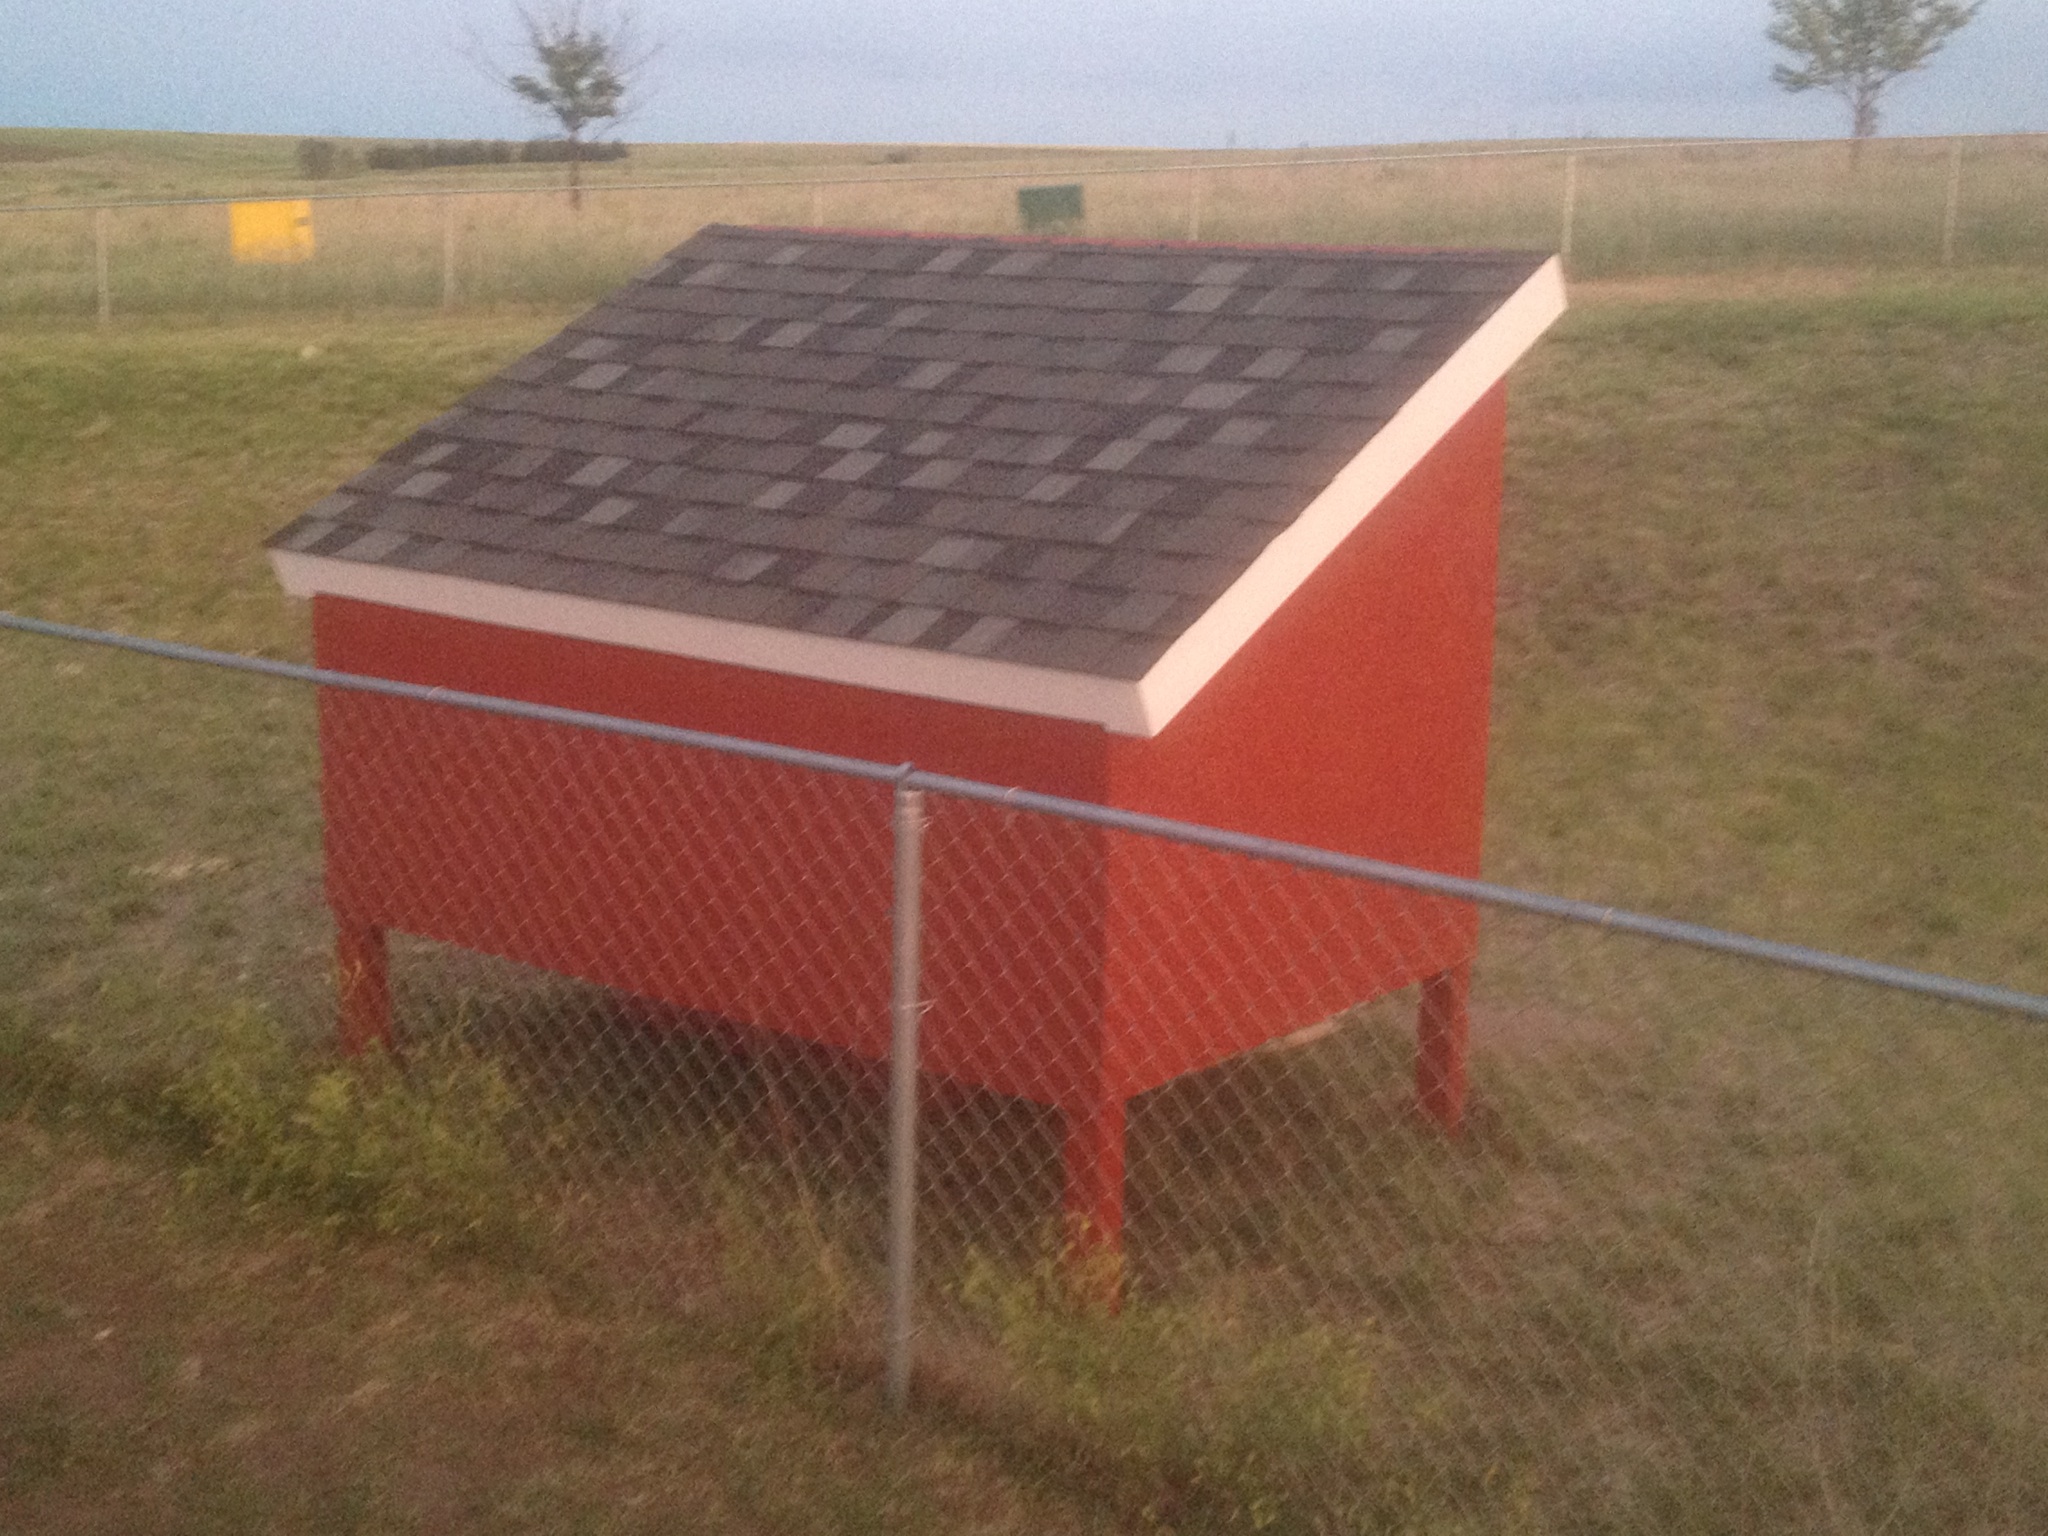 A shot of the coop with the roof shingled and completely painted for the first time.